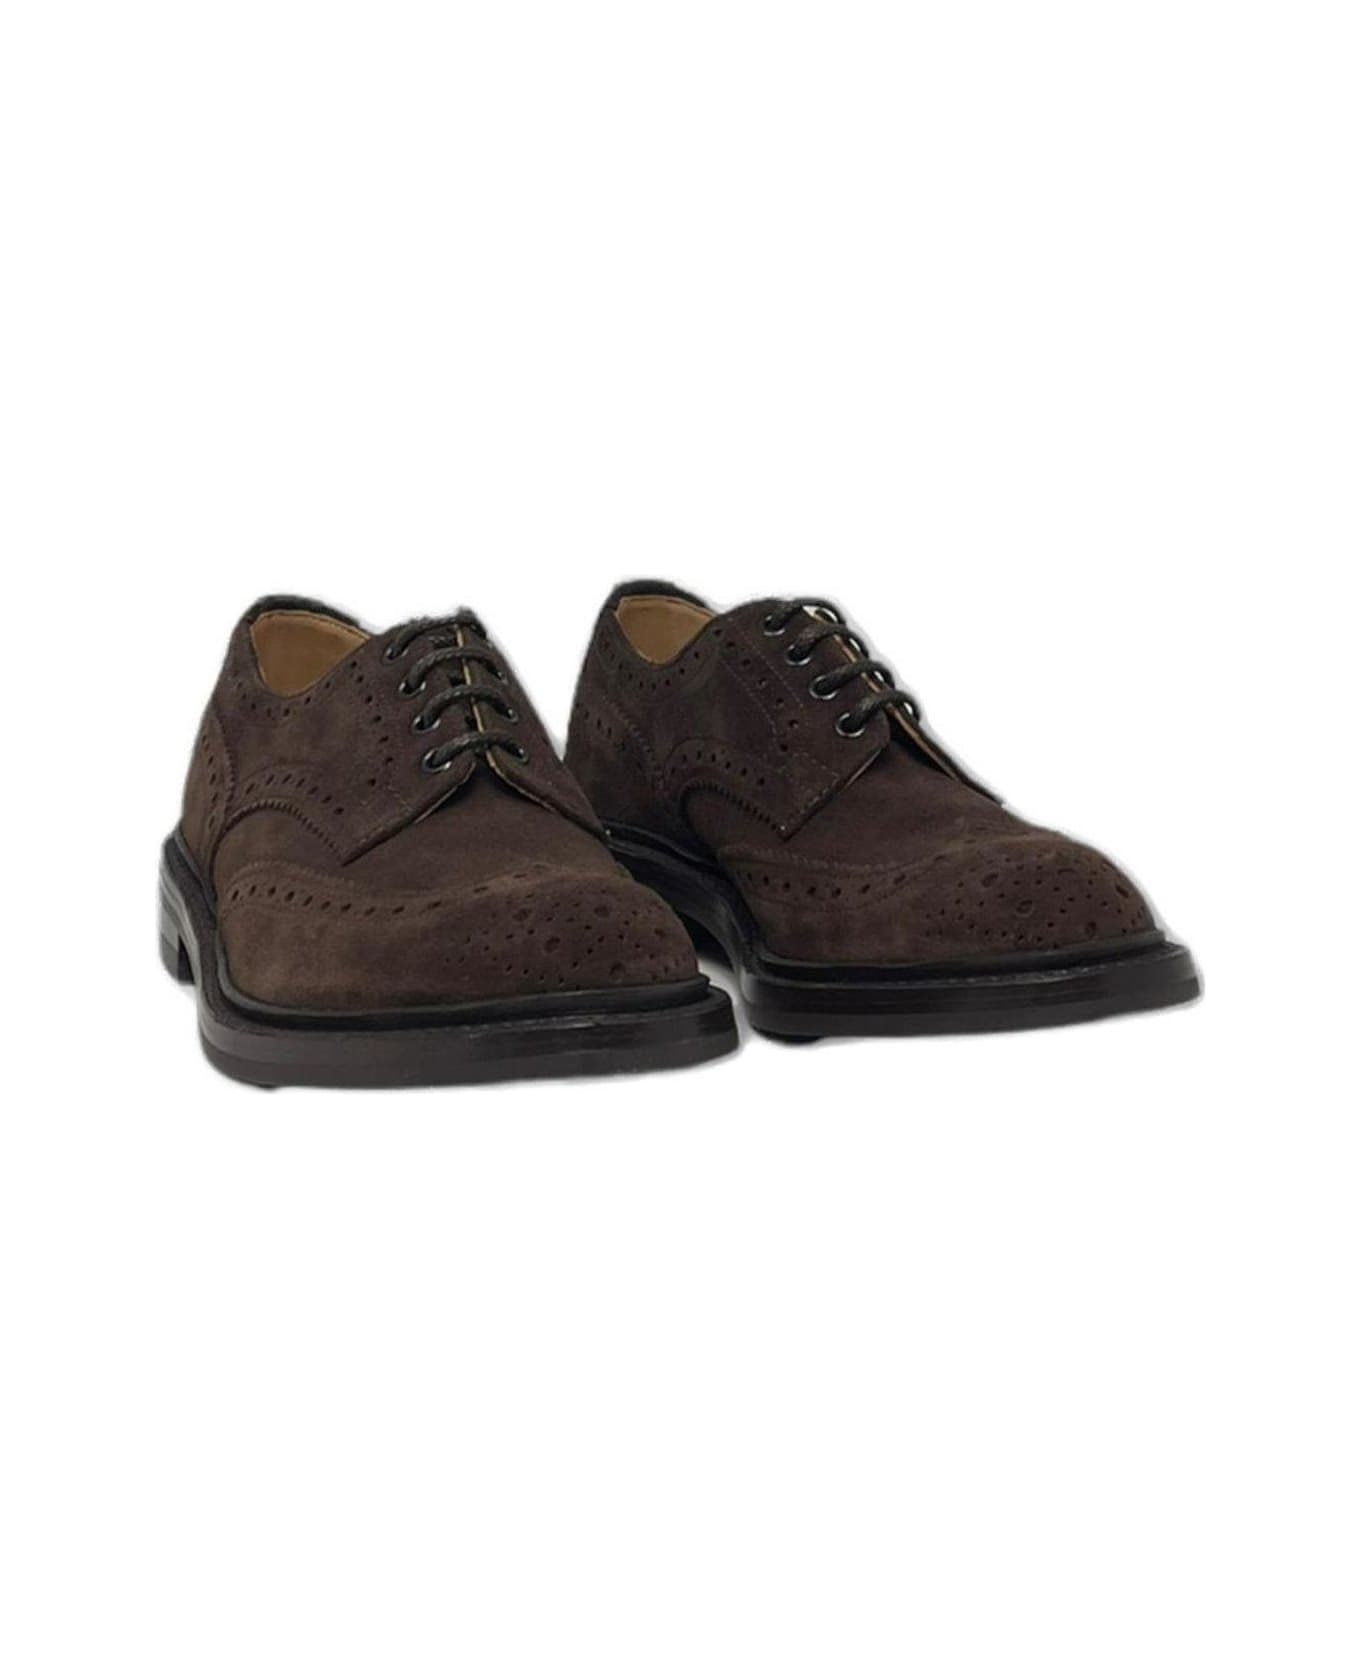 Tricker's Bourton Brogue Lace-up Shoes Tricker's ローファー＆デッキシューズ